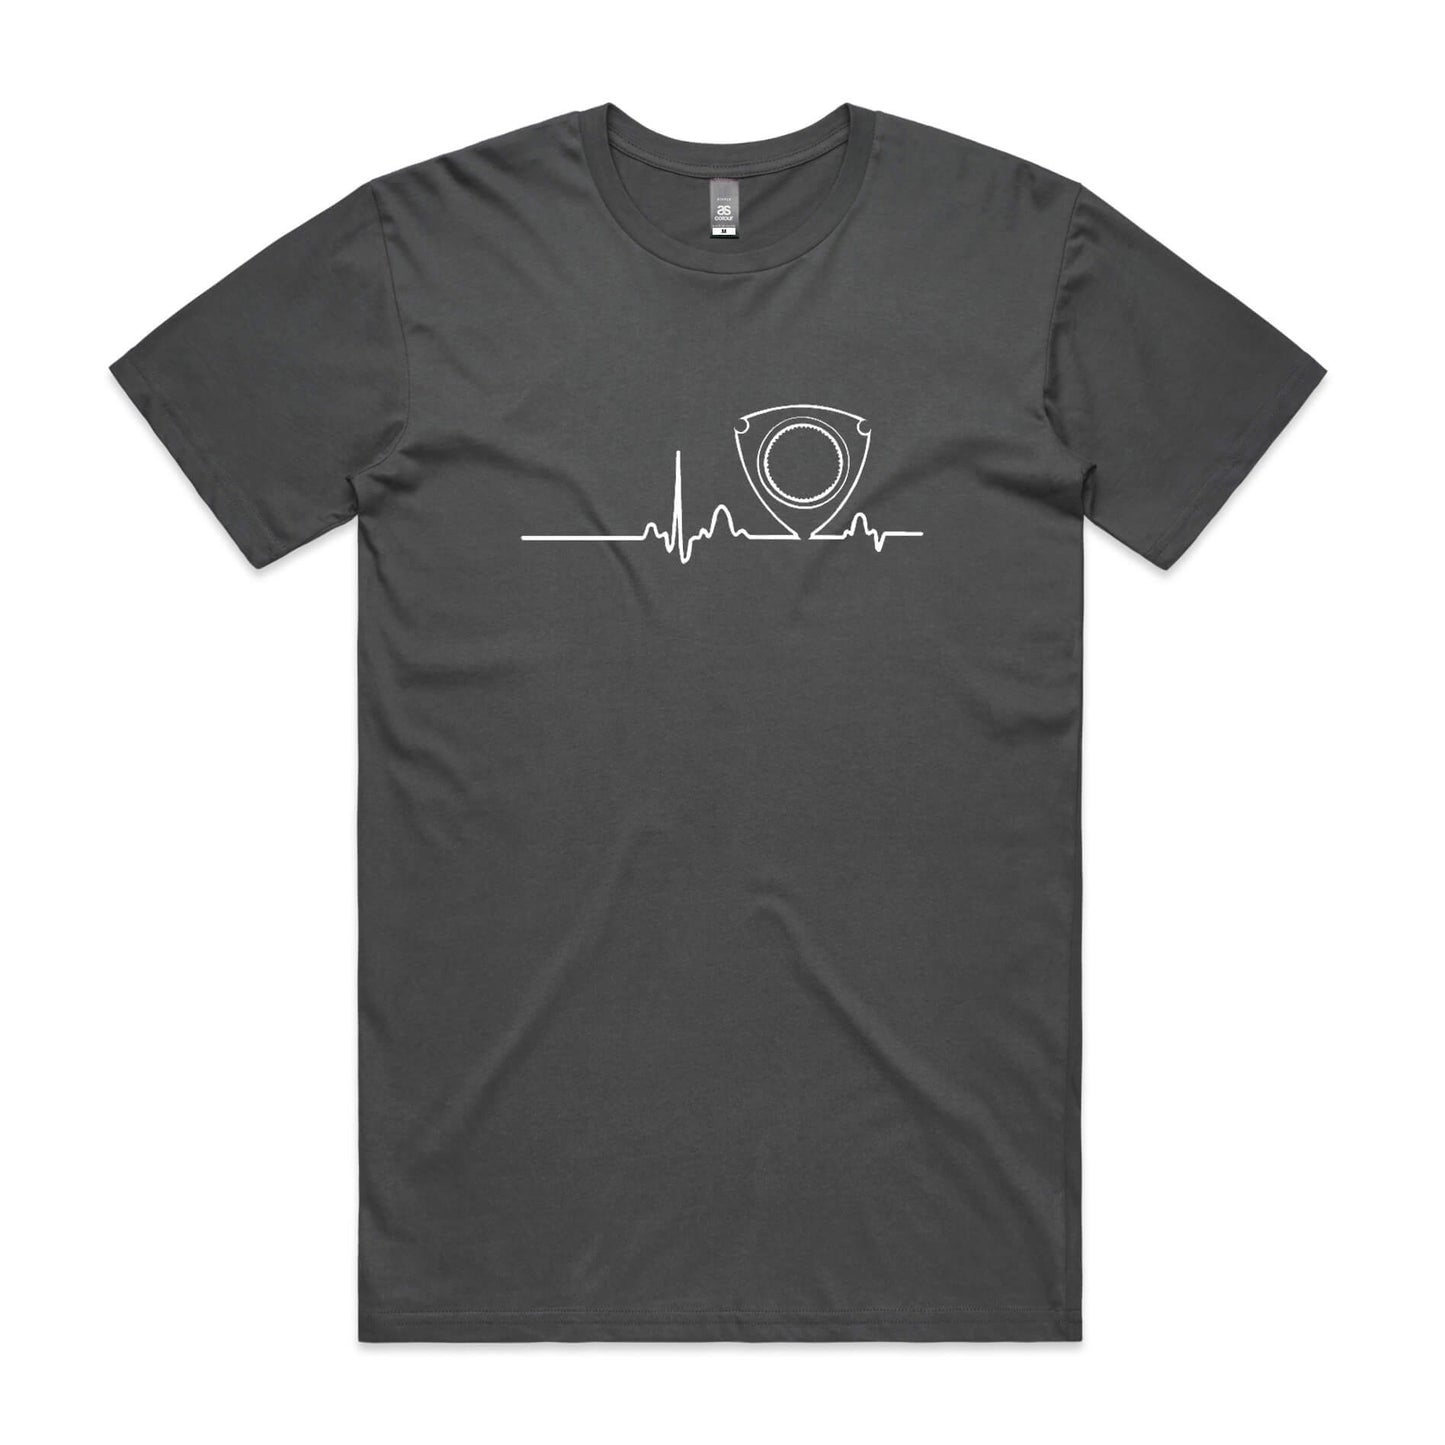 Rotary pulse t-shirt in charcoal grey